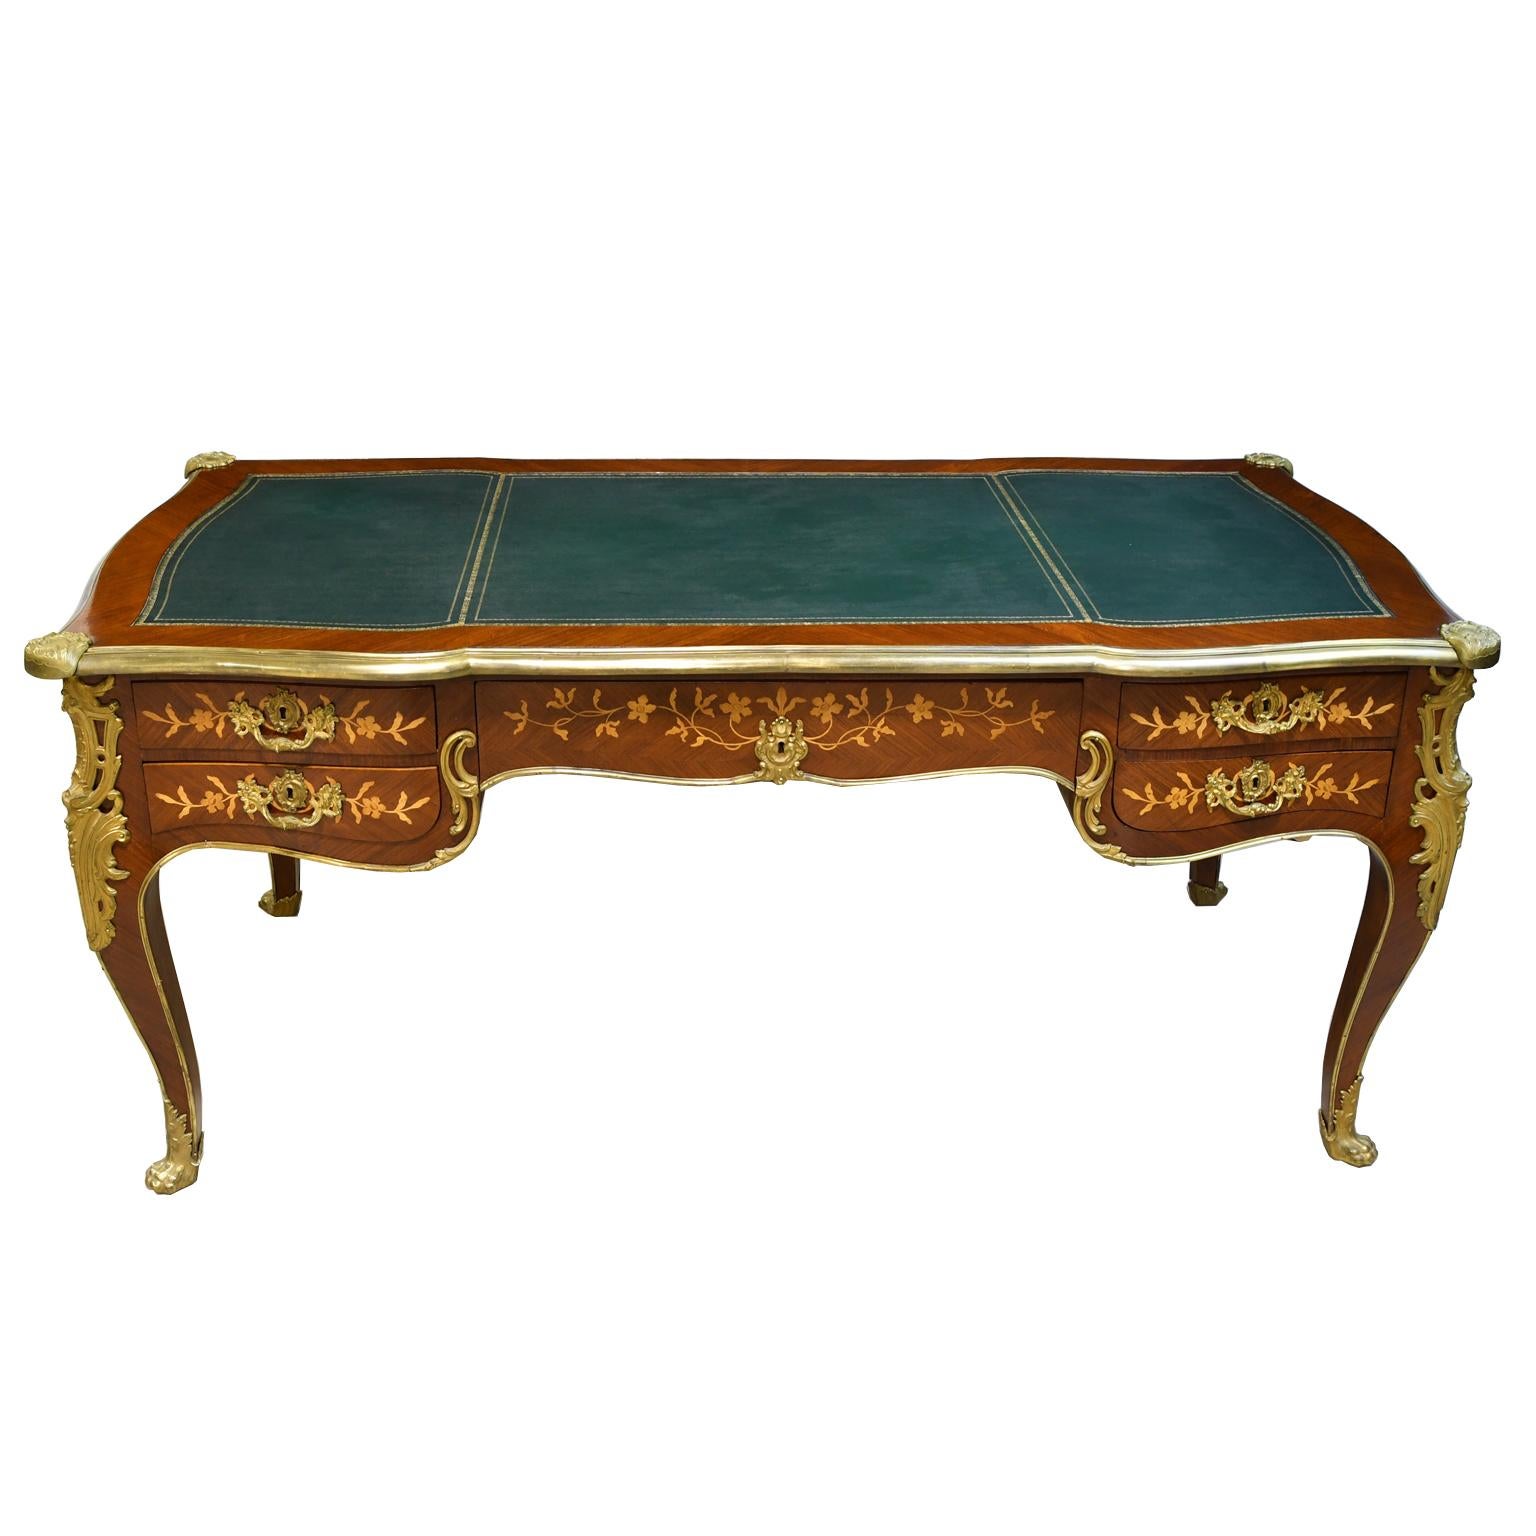 Gilt French Bureau Plat with Parquetry, Marquetry and Ormolu, circa 1910